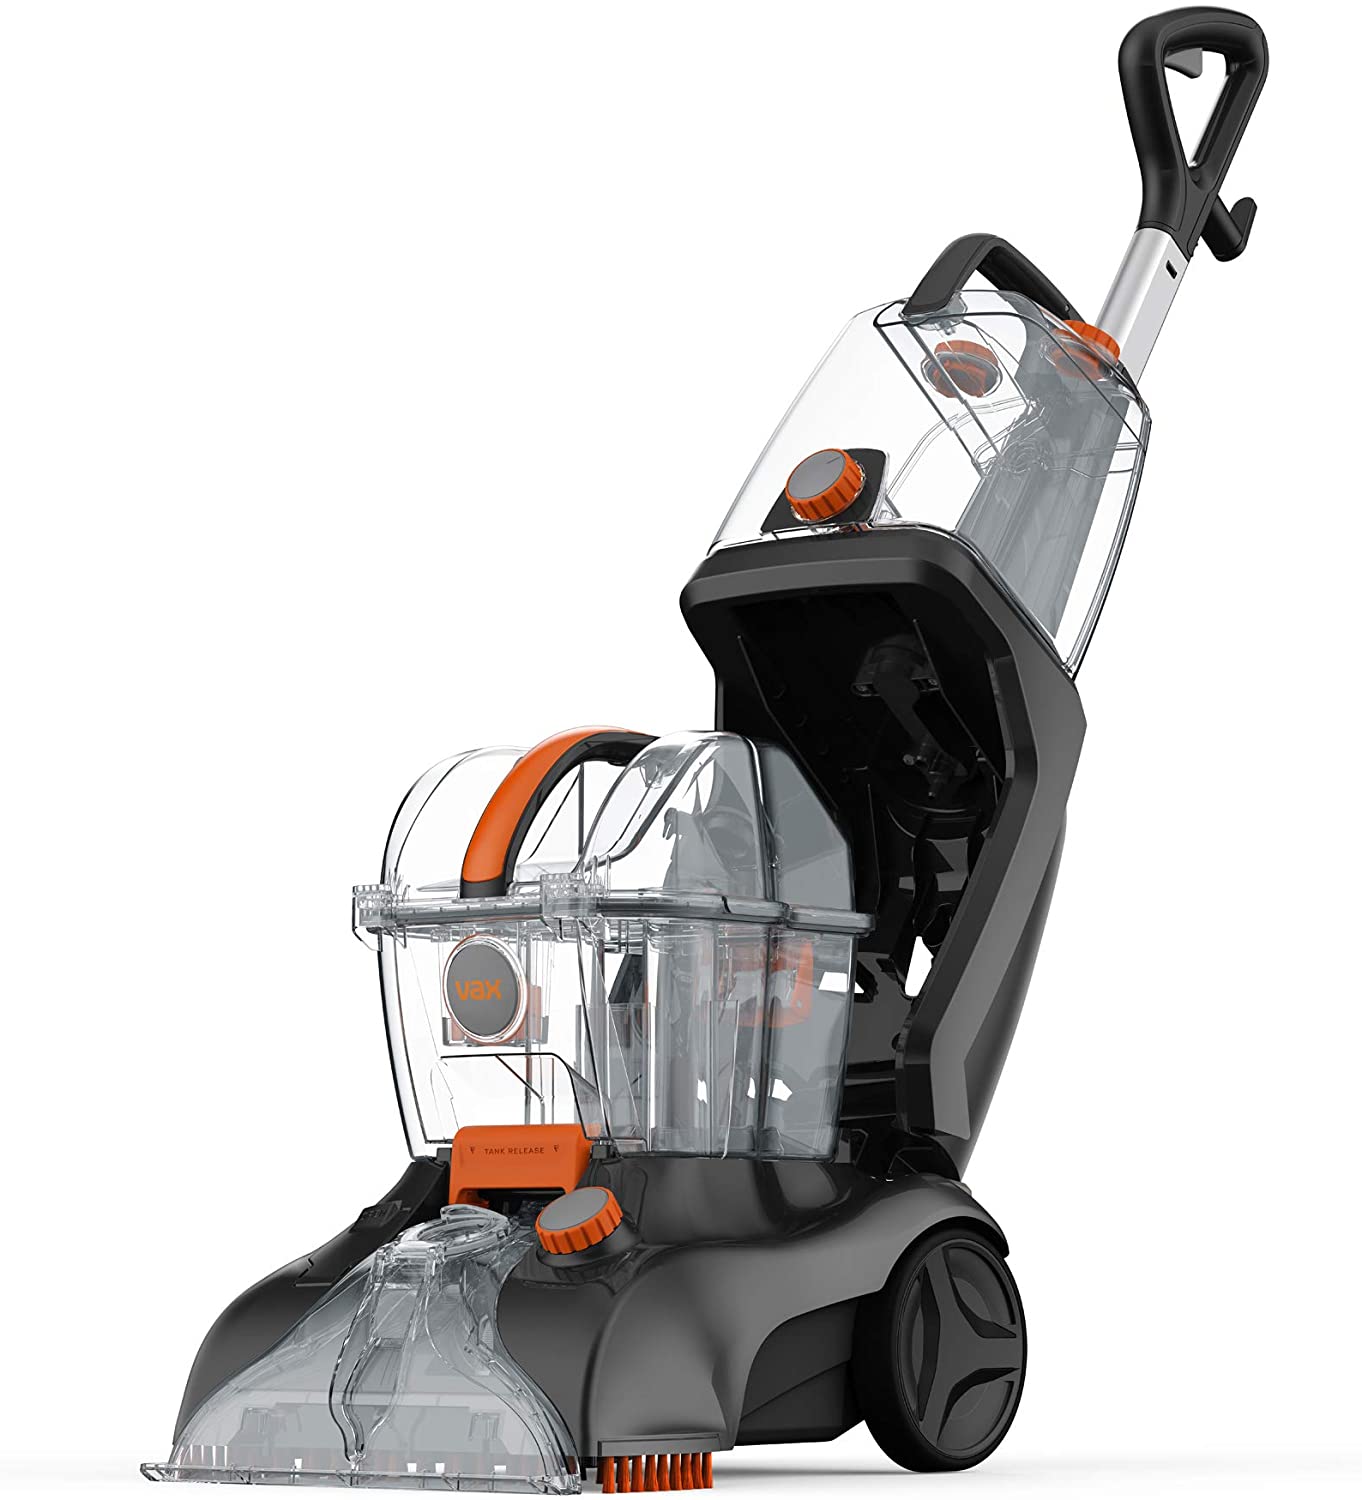 Vax Rapid Power Revive Carpet Washer